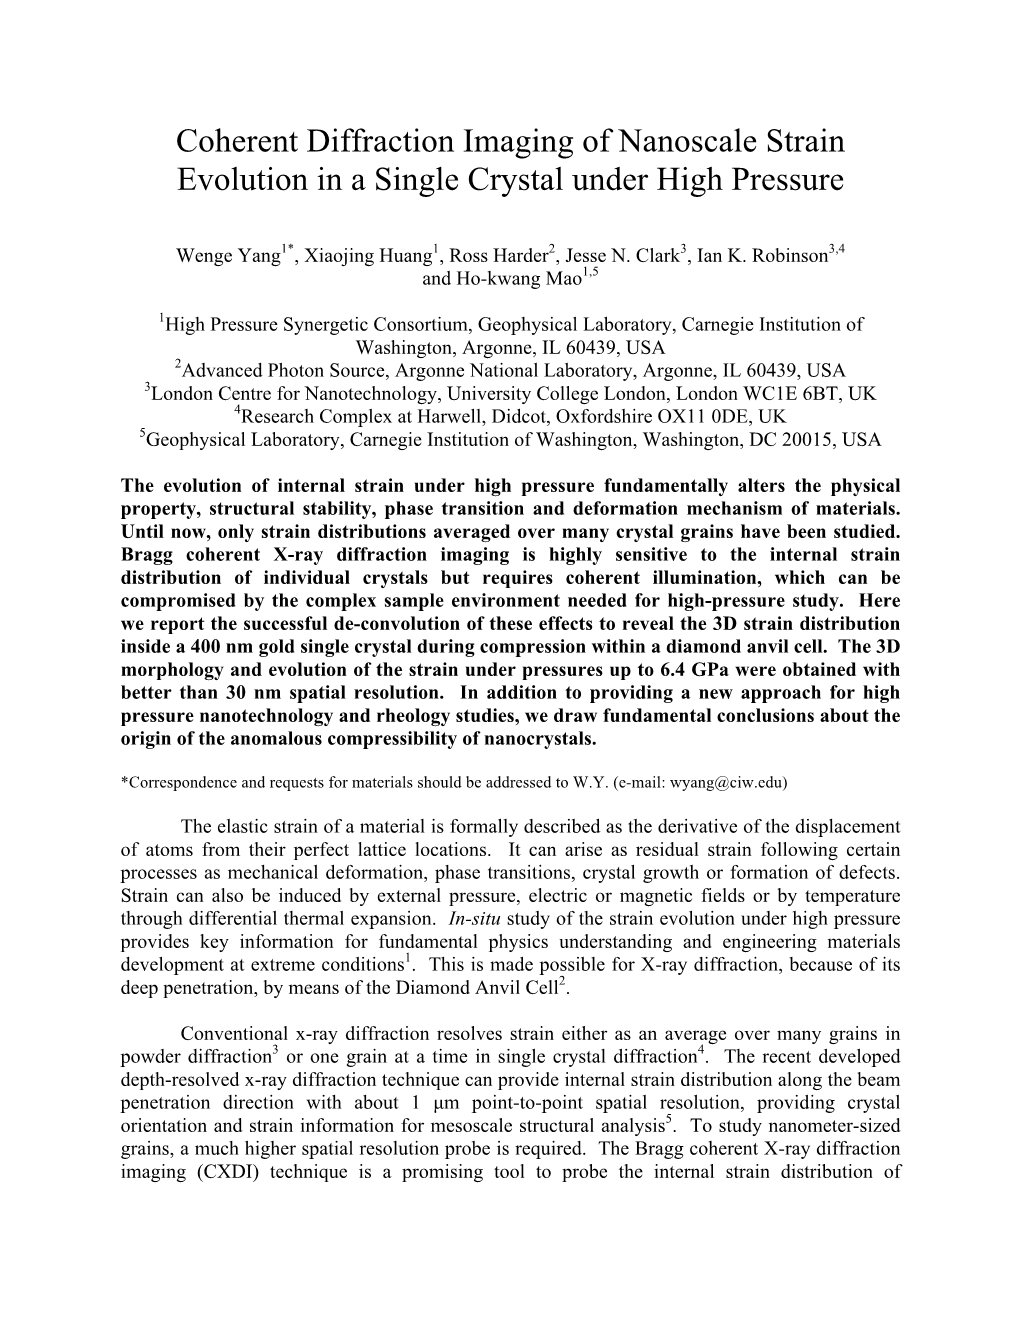 Coherent Diffraction Imaging of Nanoscale Strain Evolution in a Single Crystal Under High Pressure